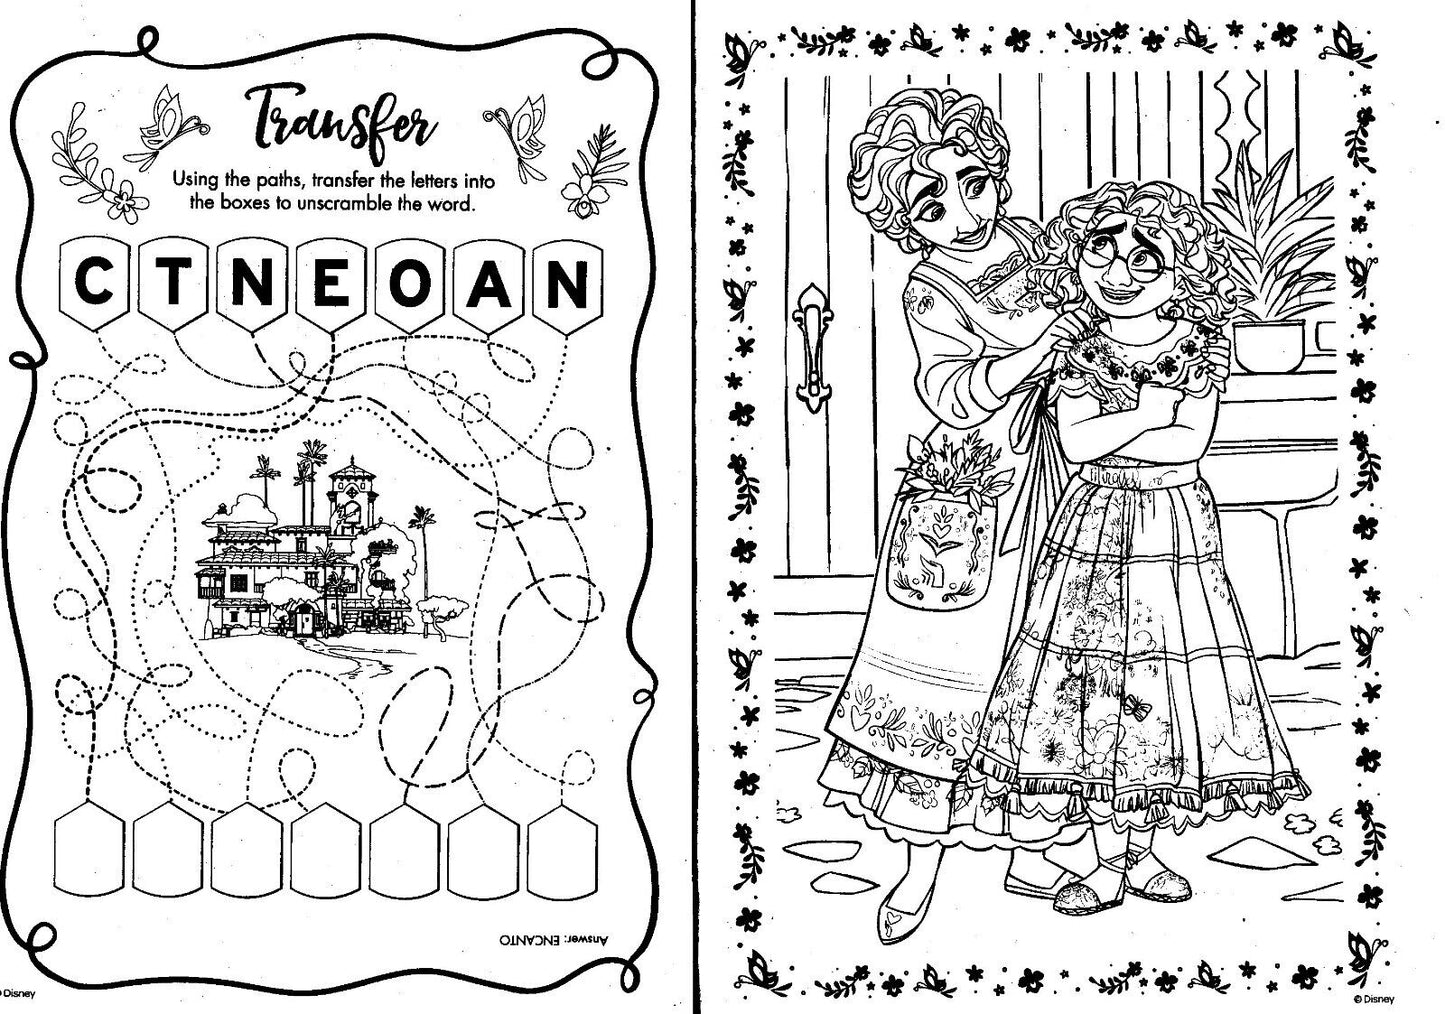 Disney Encanto - Jumbo Coloring & Activity Book Book 80 pages (Set of 2 Books)